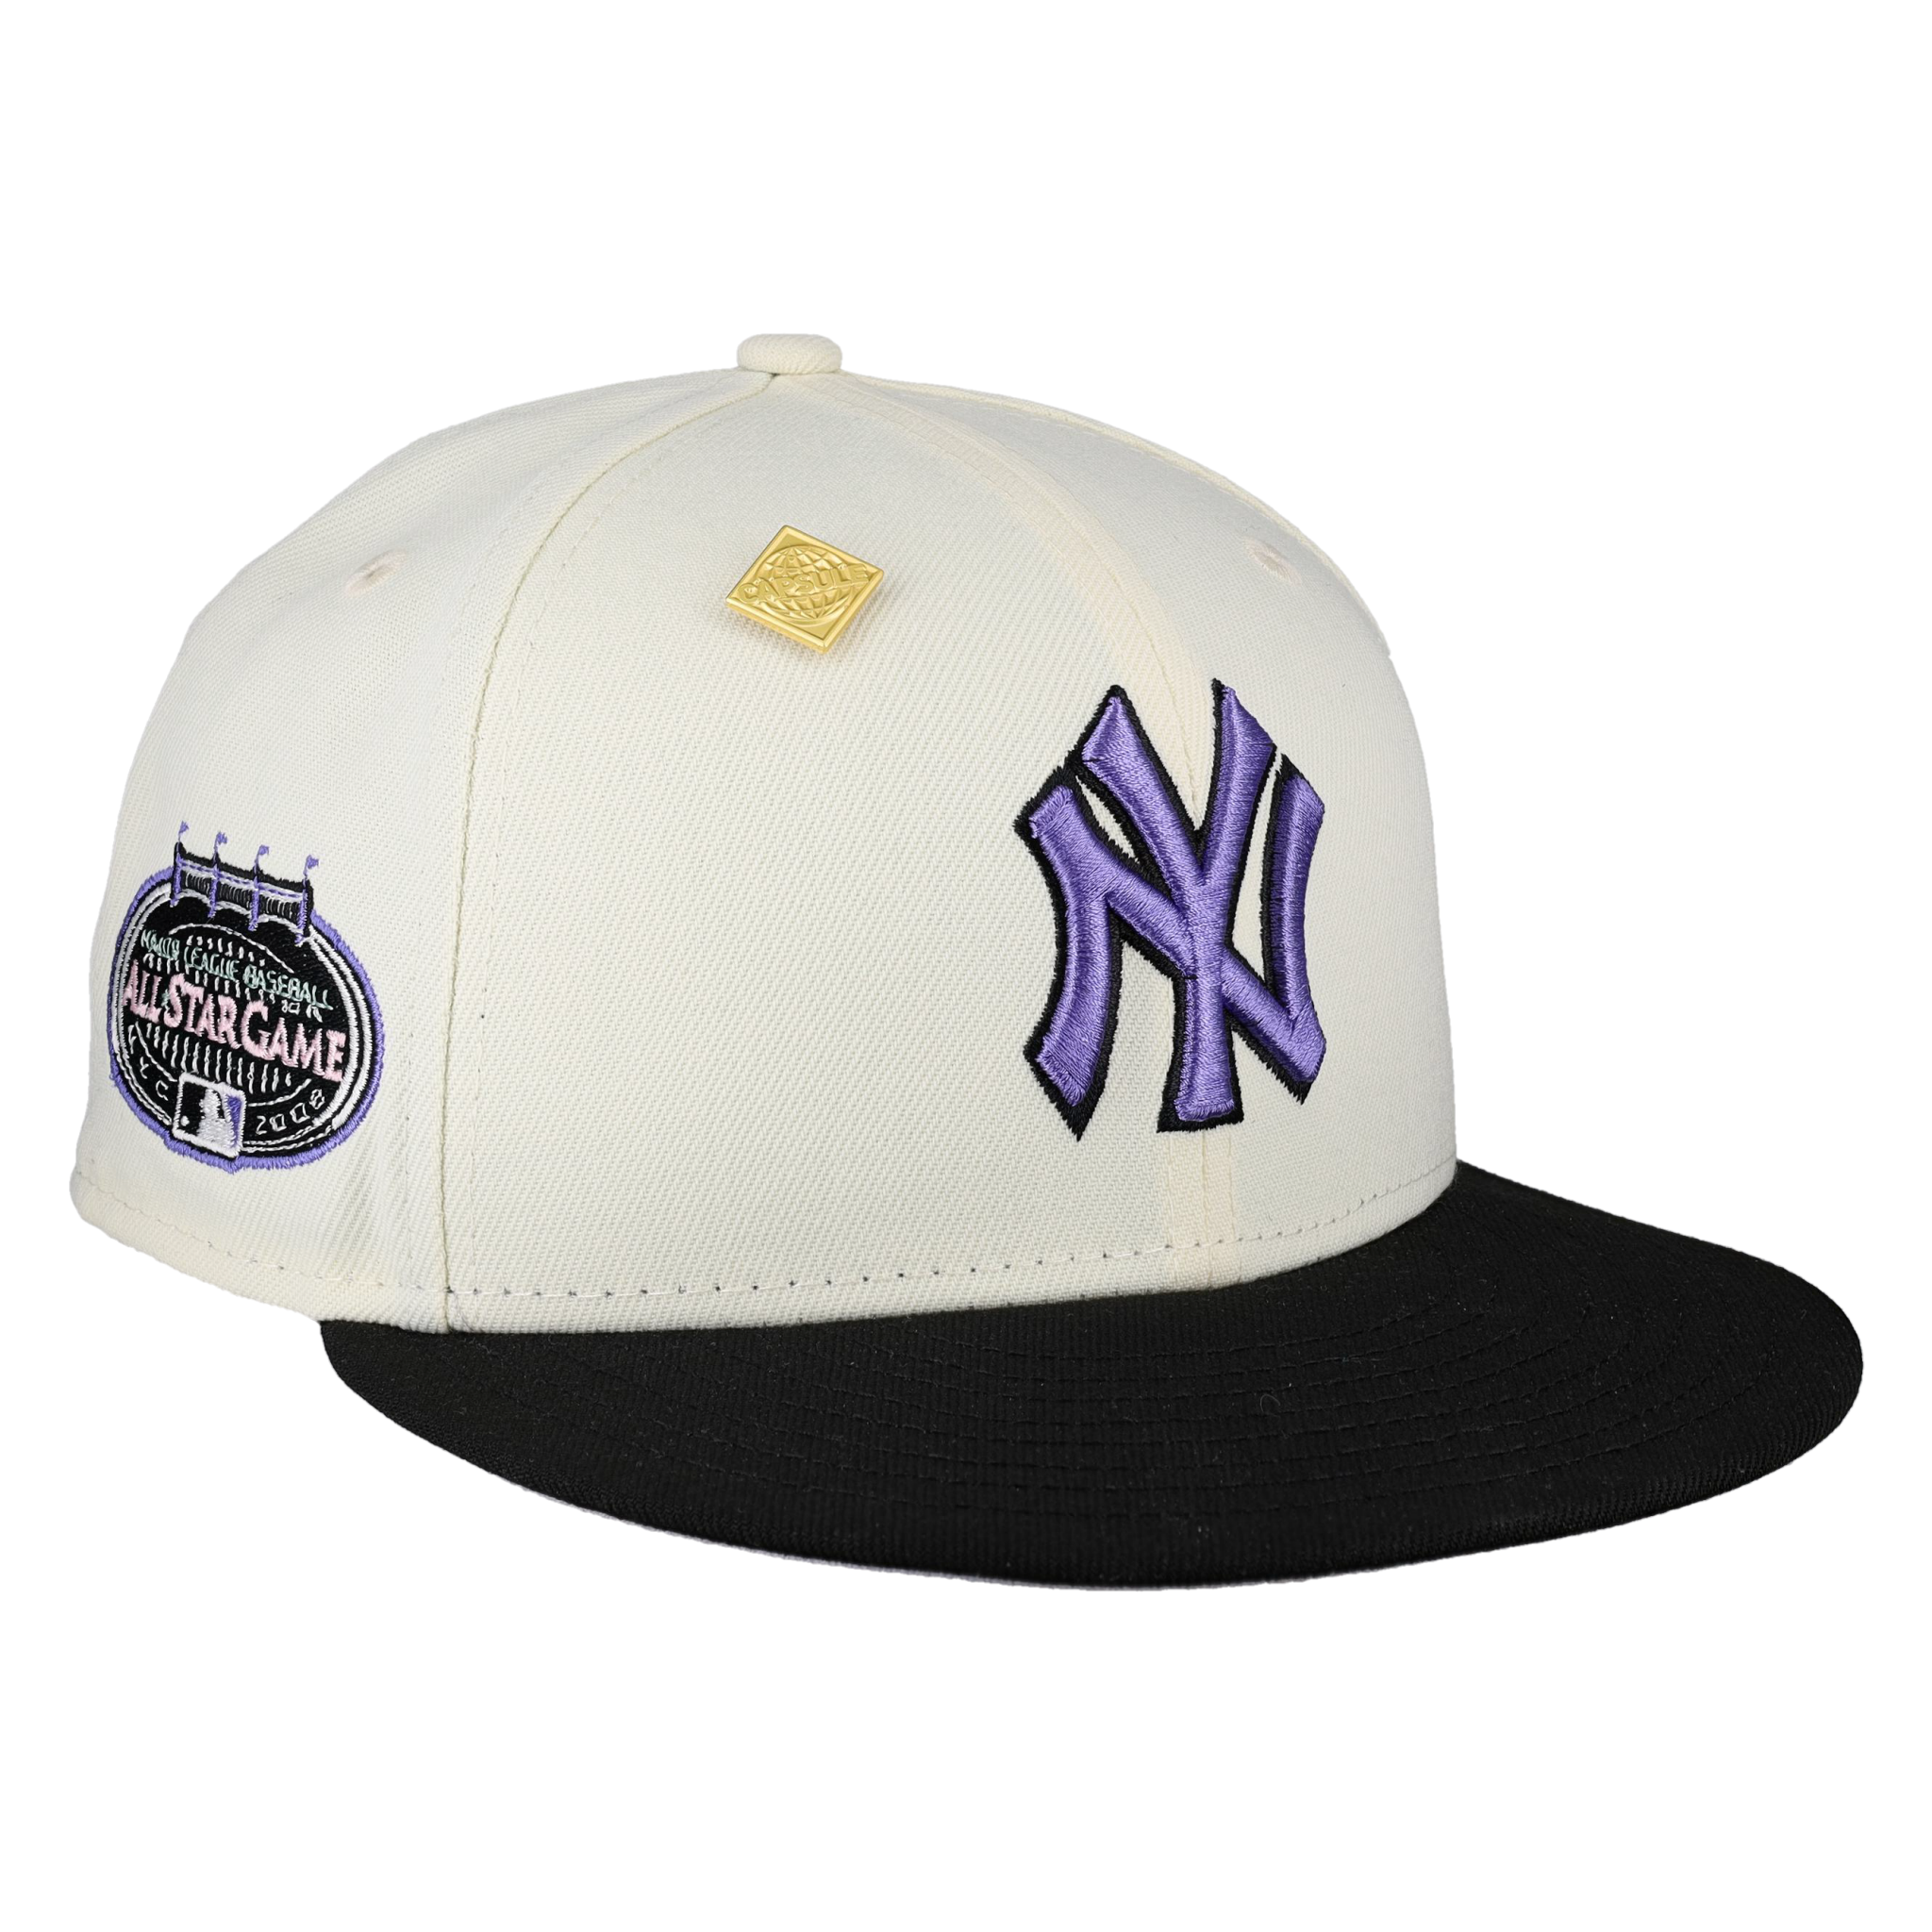 New York Yankees New Era 2008 MLB All-Star Game 59FIFTY Fitted Hat